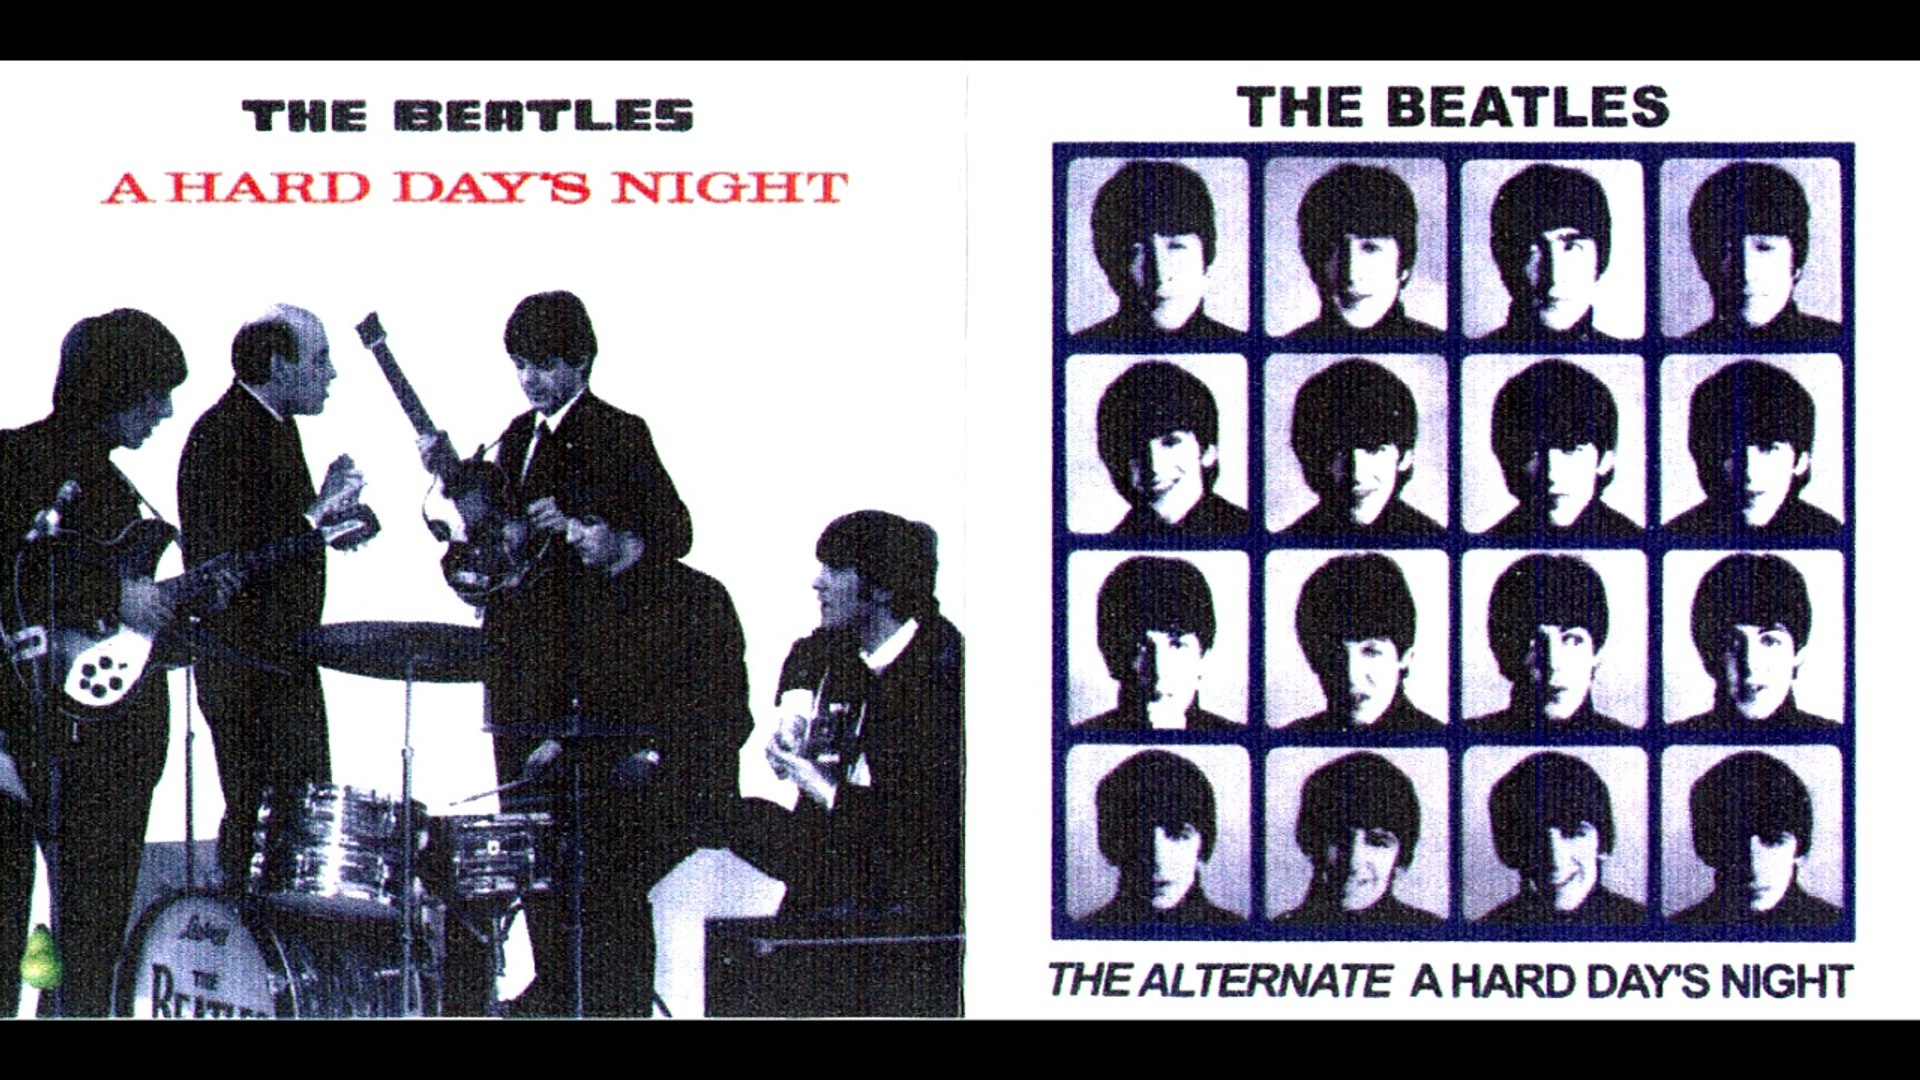 The beatles a hard day s night. The Beatles a hard Day's Night 1964. The Beatles a hard Day's Night альбом. Beatles "hard Days Night". Hard Days Night альбом.